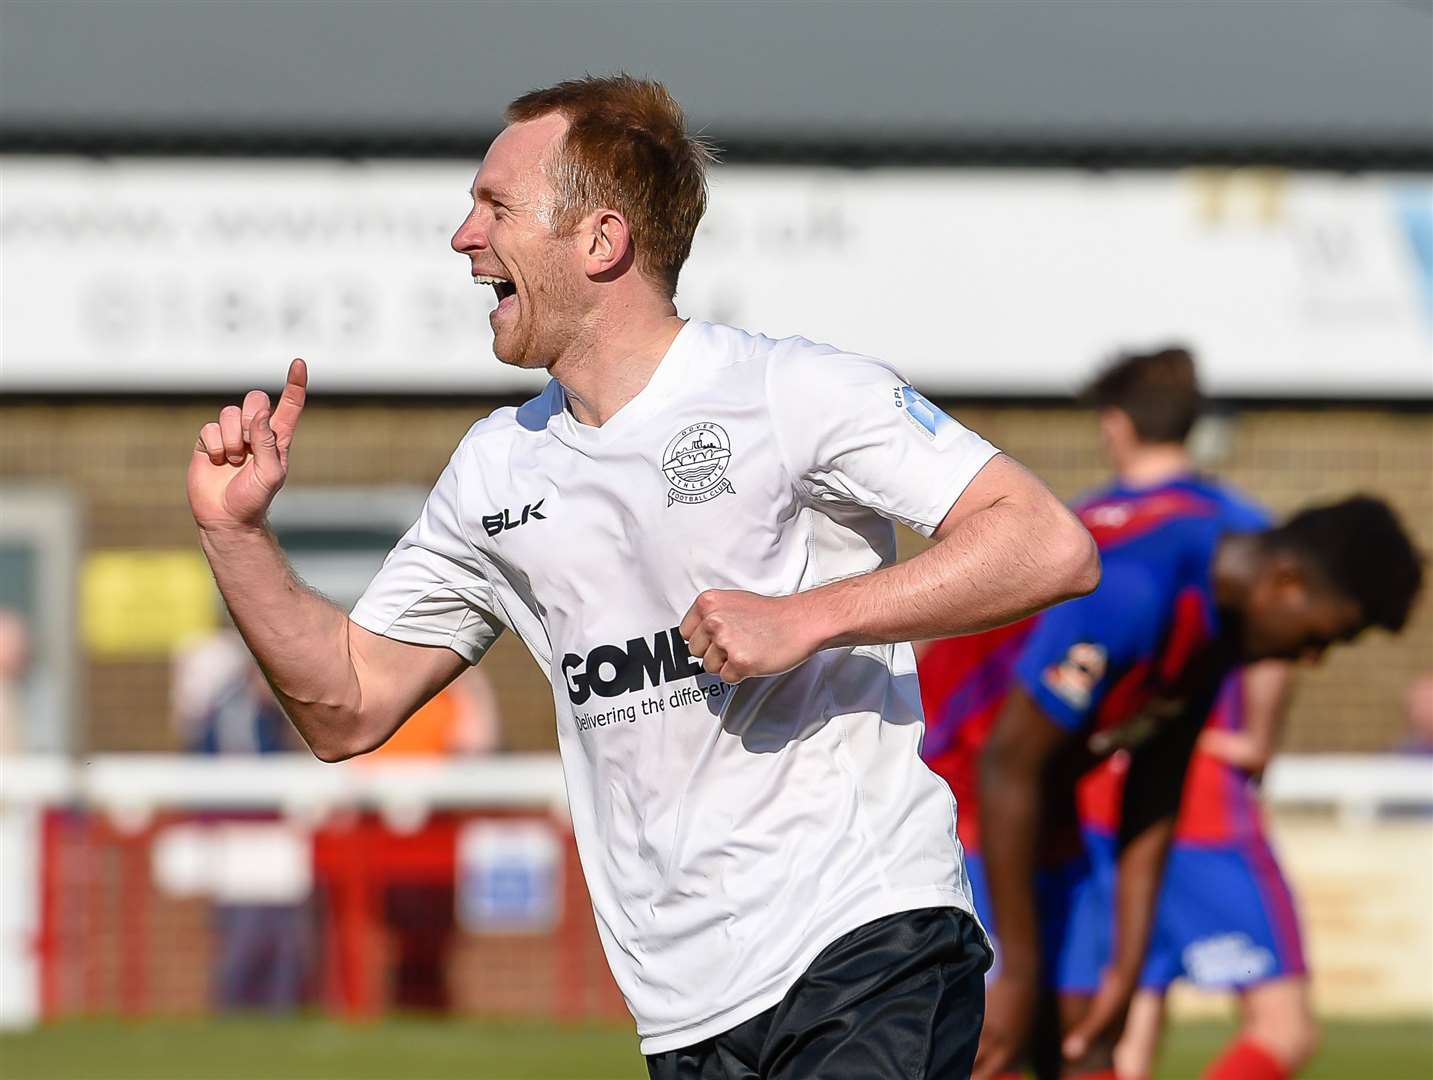 Dover Athletic proved to be the final club of Stuart Lewis' playing career Picture: Alan Langley